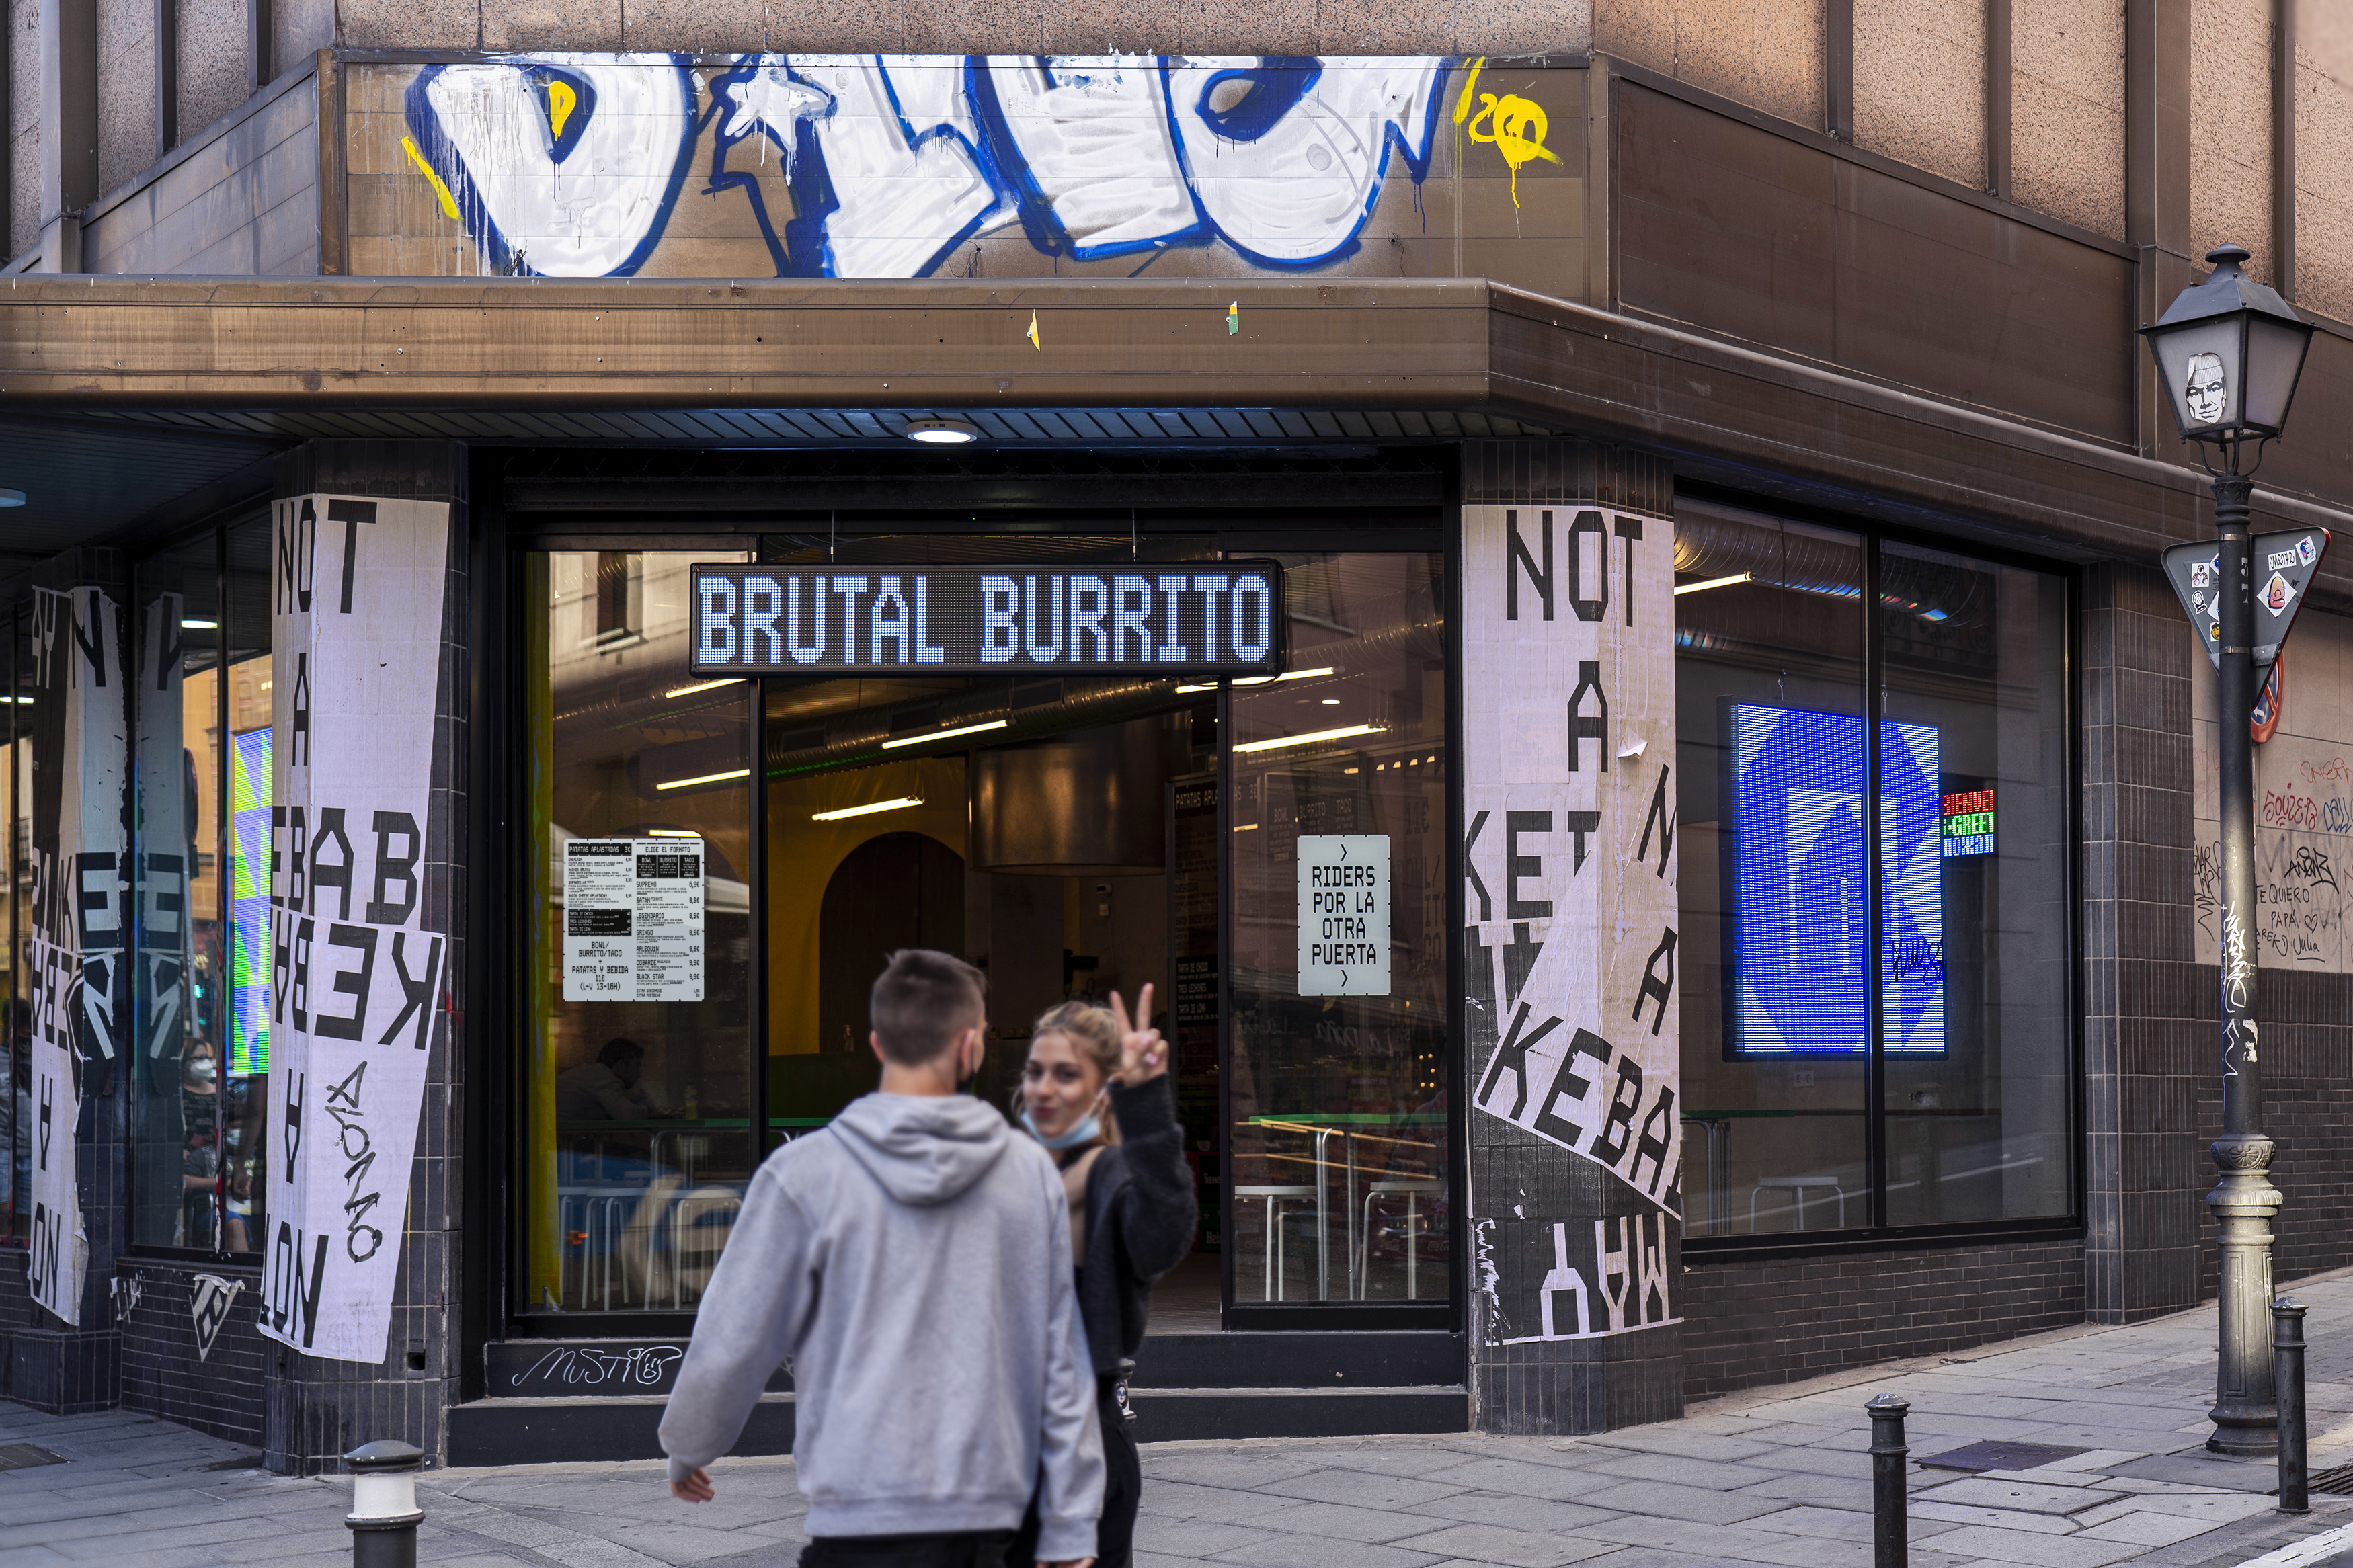 New brand identity for the Madrid-based burritos and fast food business Brutal Burrito by Tres Tipos Gráficos